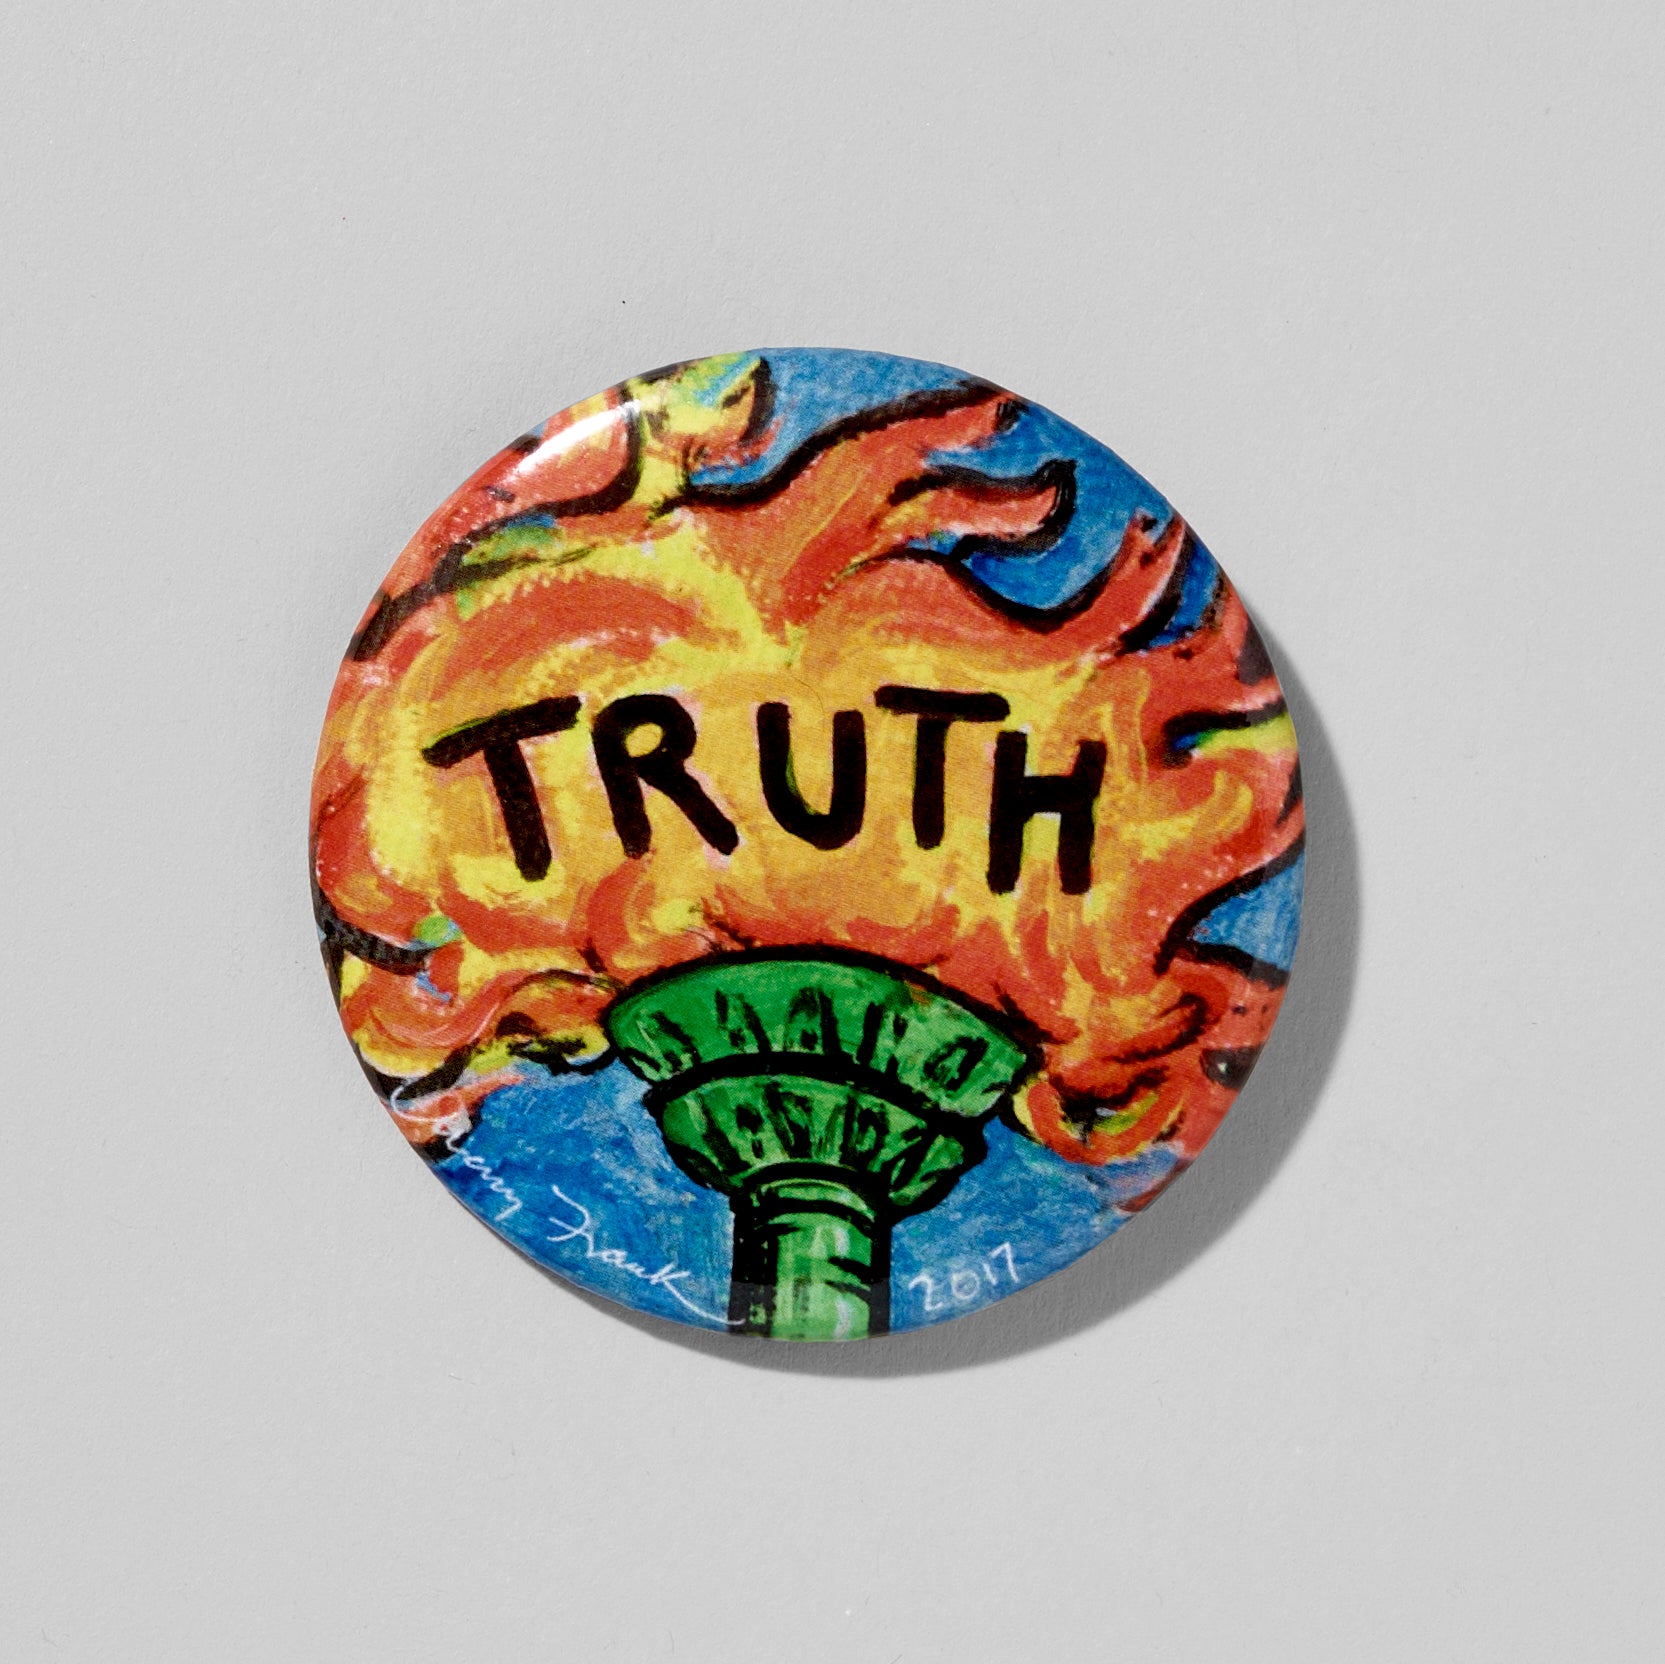 2.25" Diameter round Truth button by artist Mary Frank